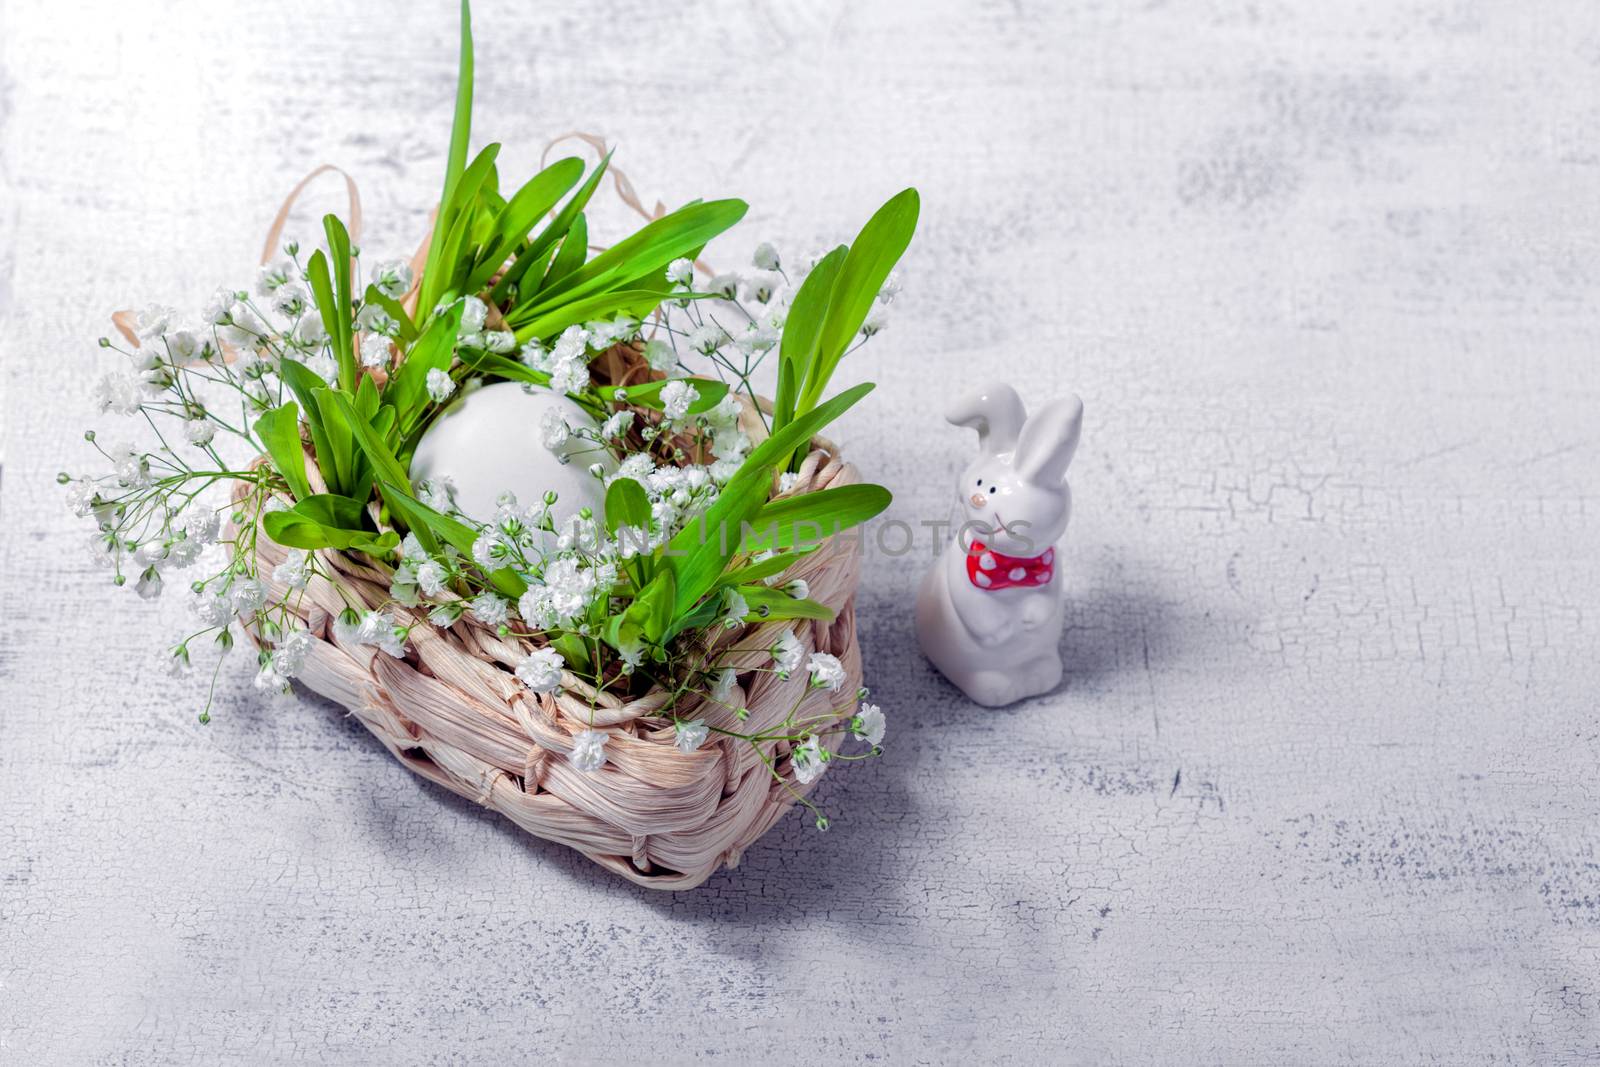 Bunny, eggs and white flowers Easter symbols by supercat67